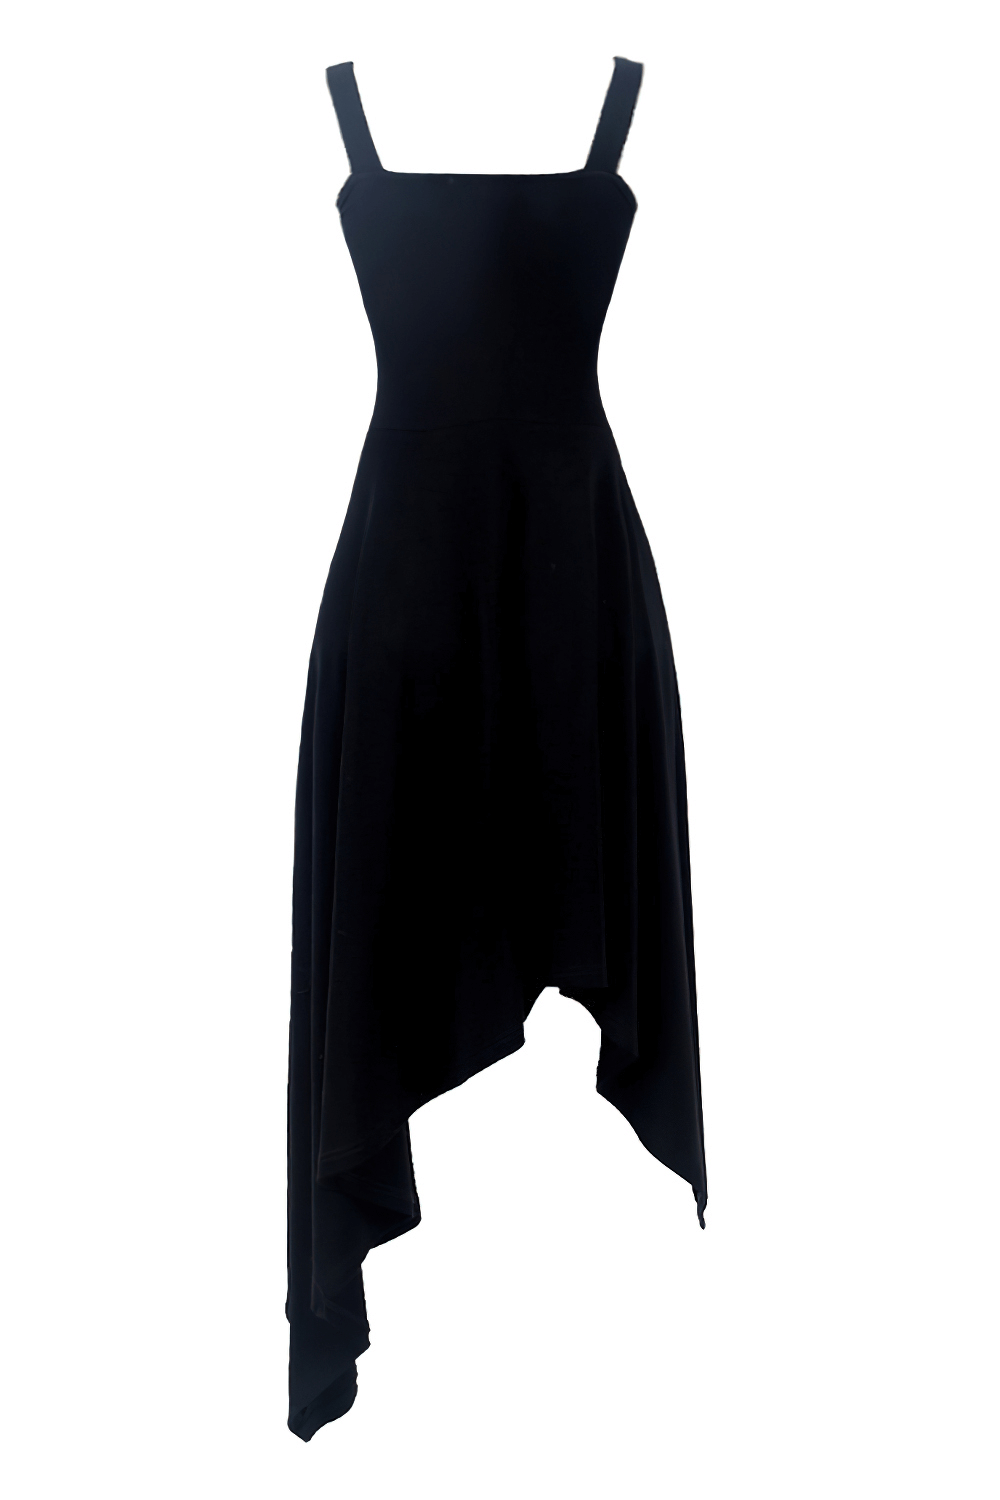 Chic Asymmetrical Dress with Strap and Chain Detailing